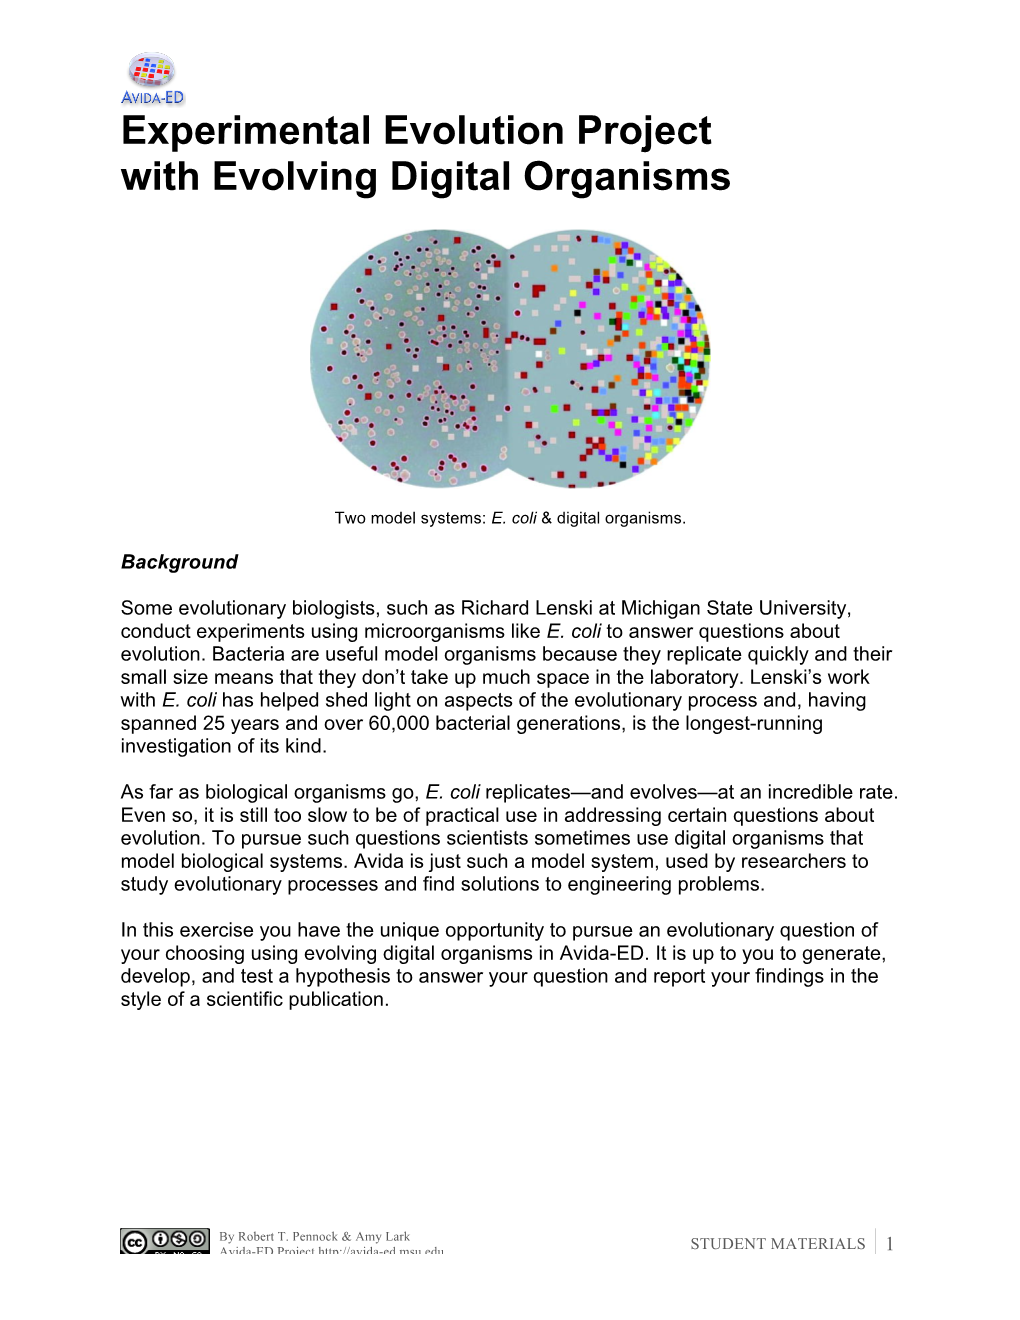 Experimental Evolution Project with Evolving Digital Organisms